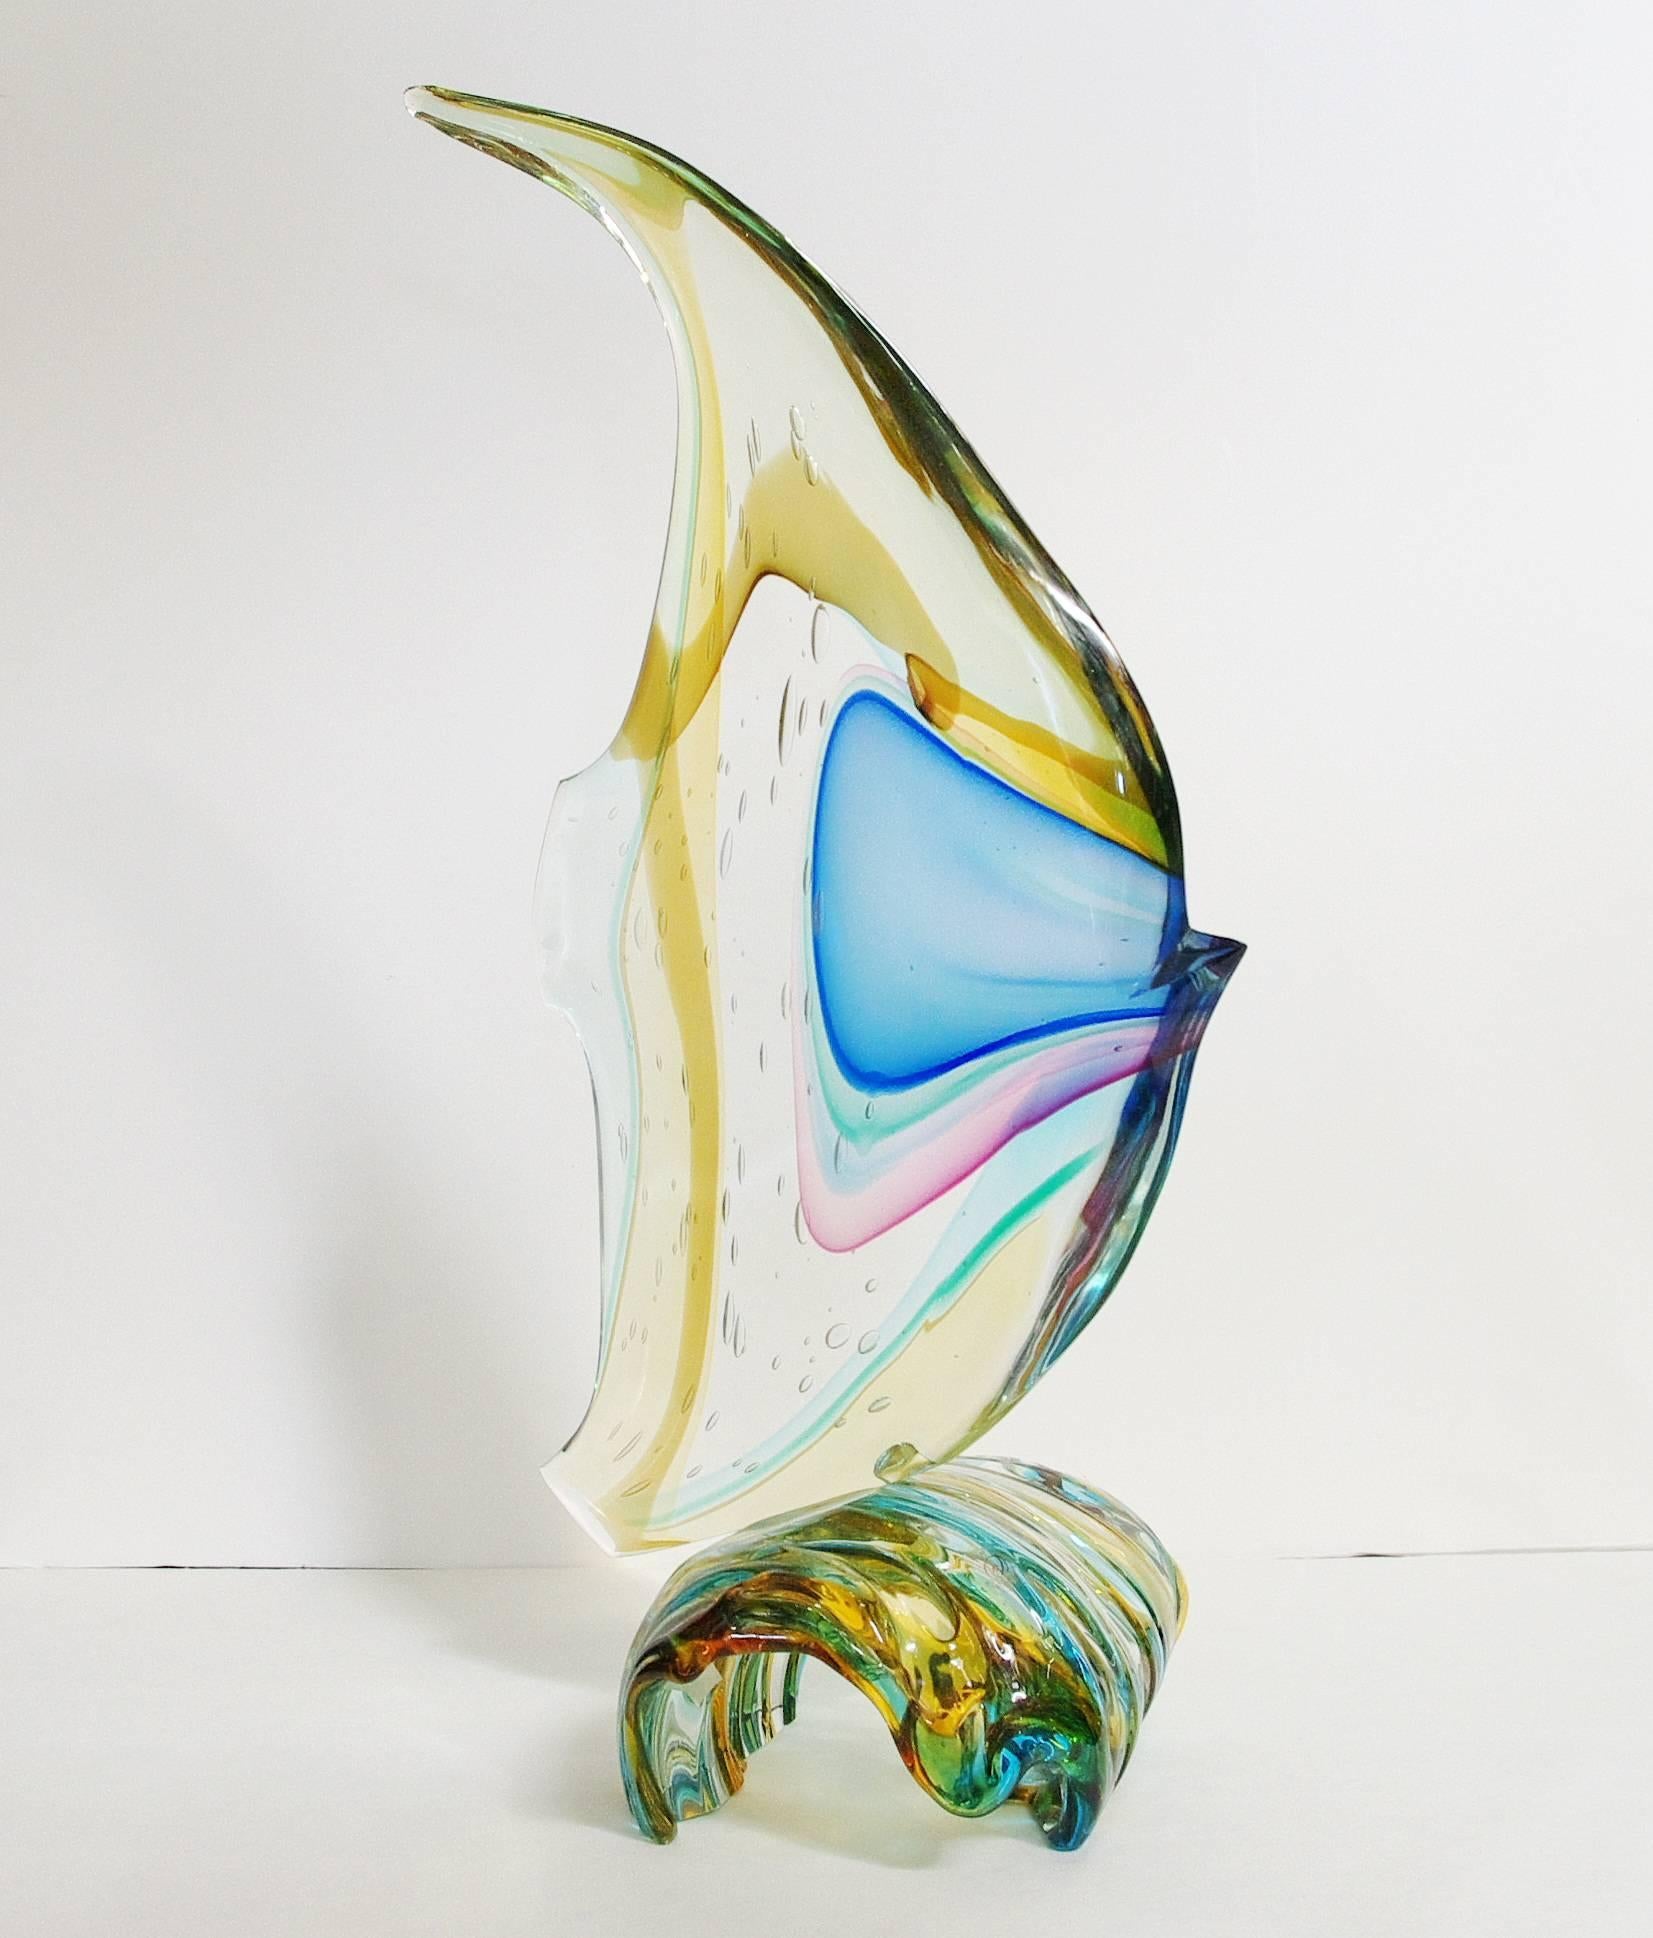 Italian Murano glass fish on wave sculpture, hand blown and crafted in multiple colors of Murano glass by Sergio Constantini 
Signed “Constantini S.” on the base / Made in Italy in the 1980’s 
Height: 23.5 inches / Width: 13 inches / Depth: 9 inches